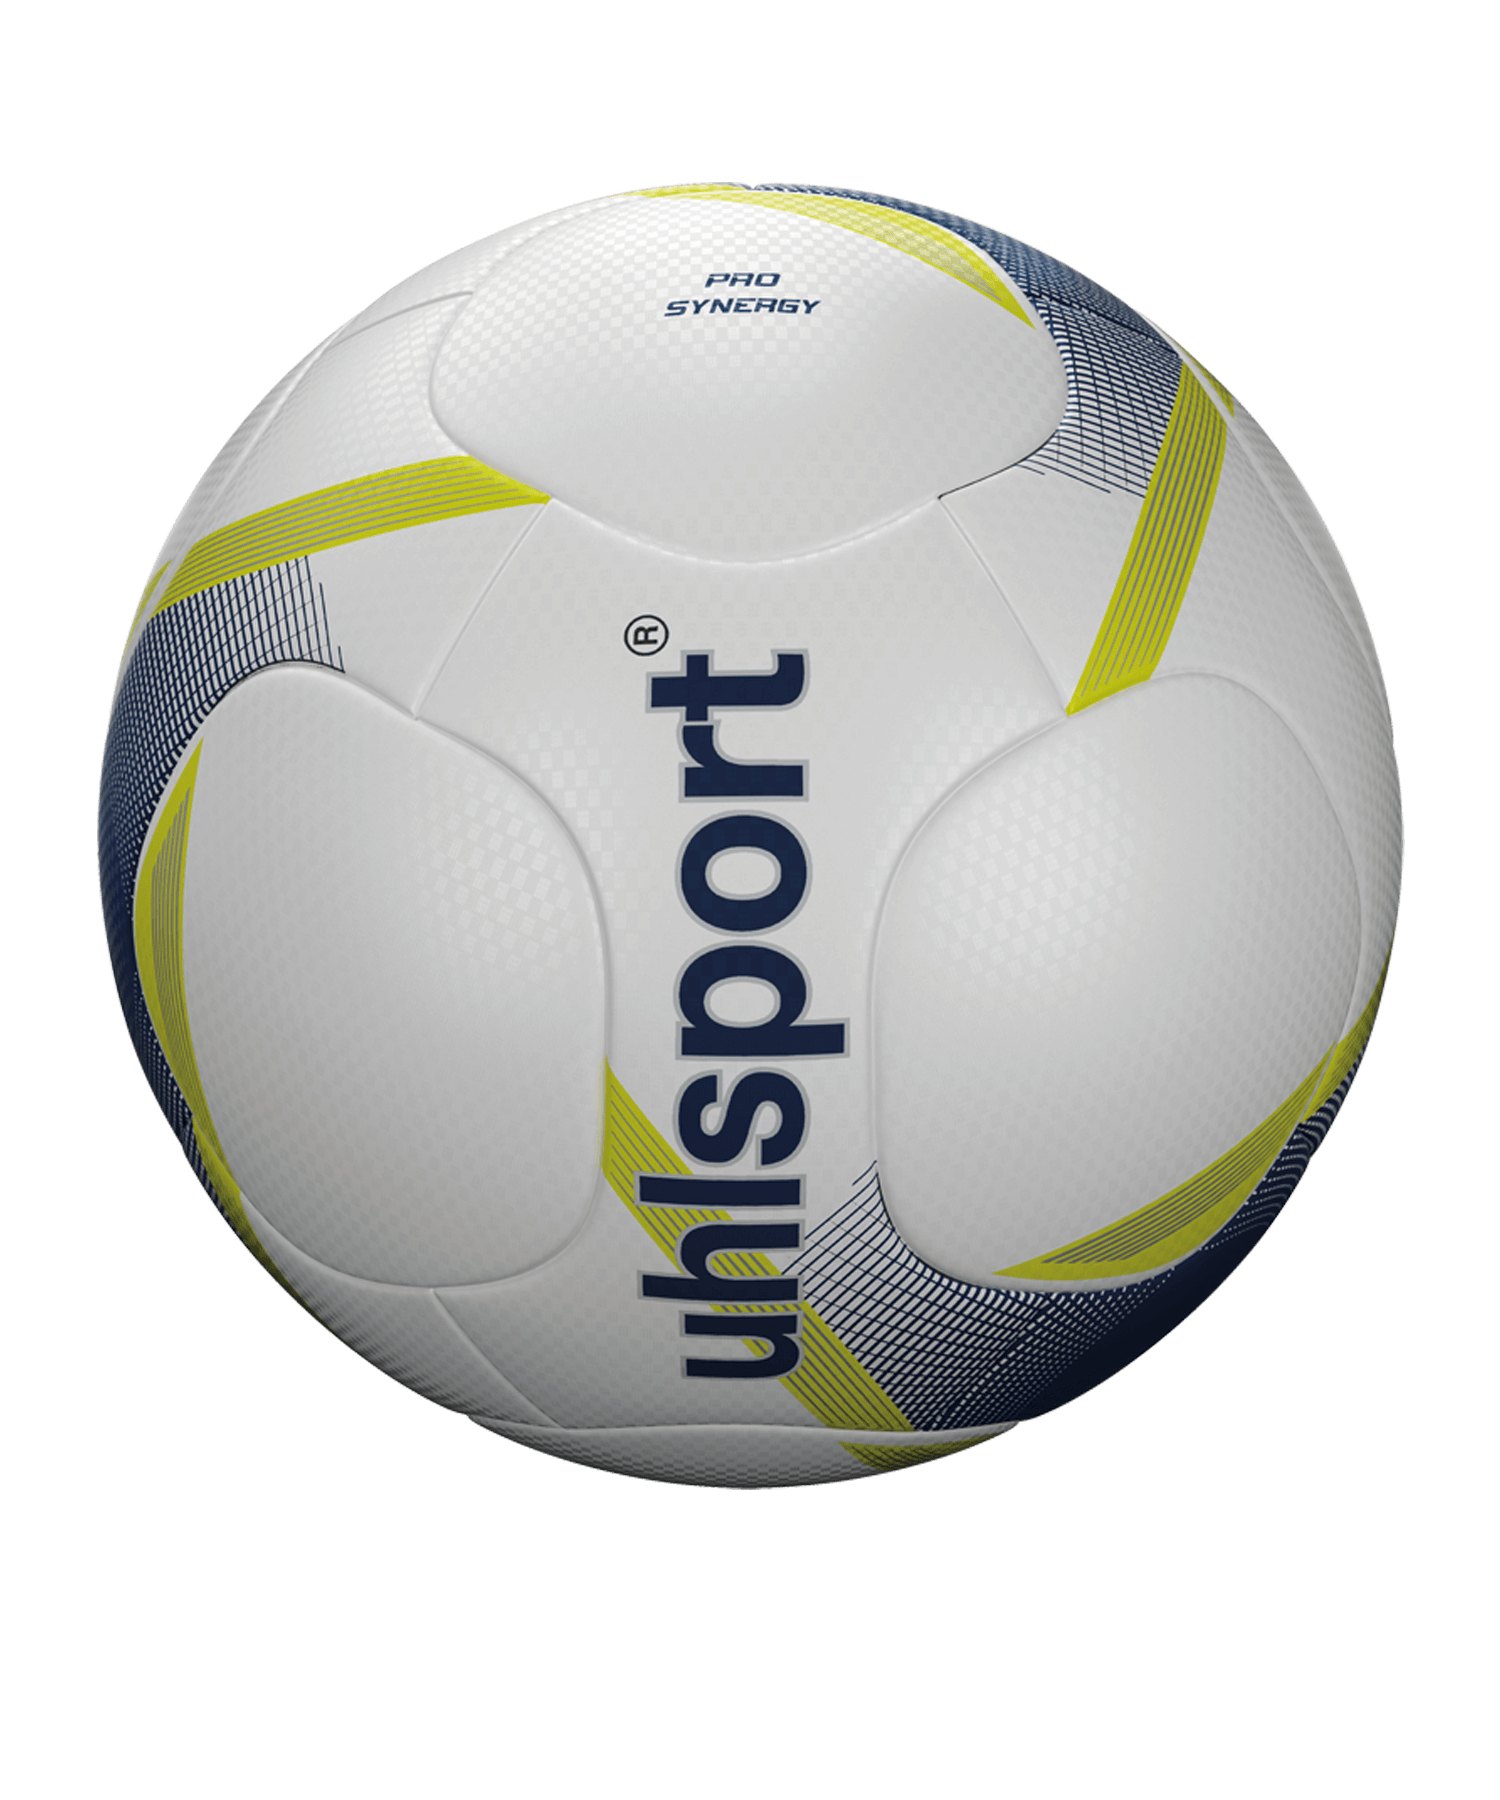 Uhlsport Infinity Synergy Pro 3.0 Fussball F01 - weiss